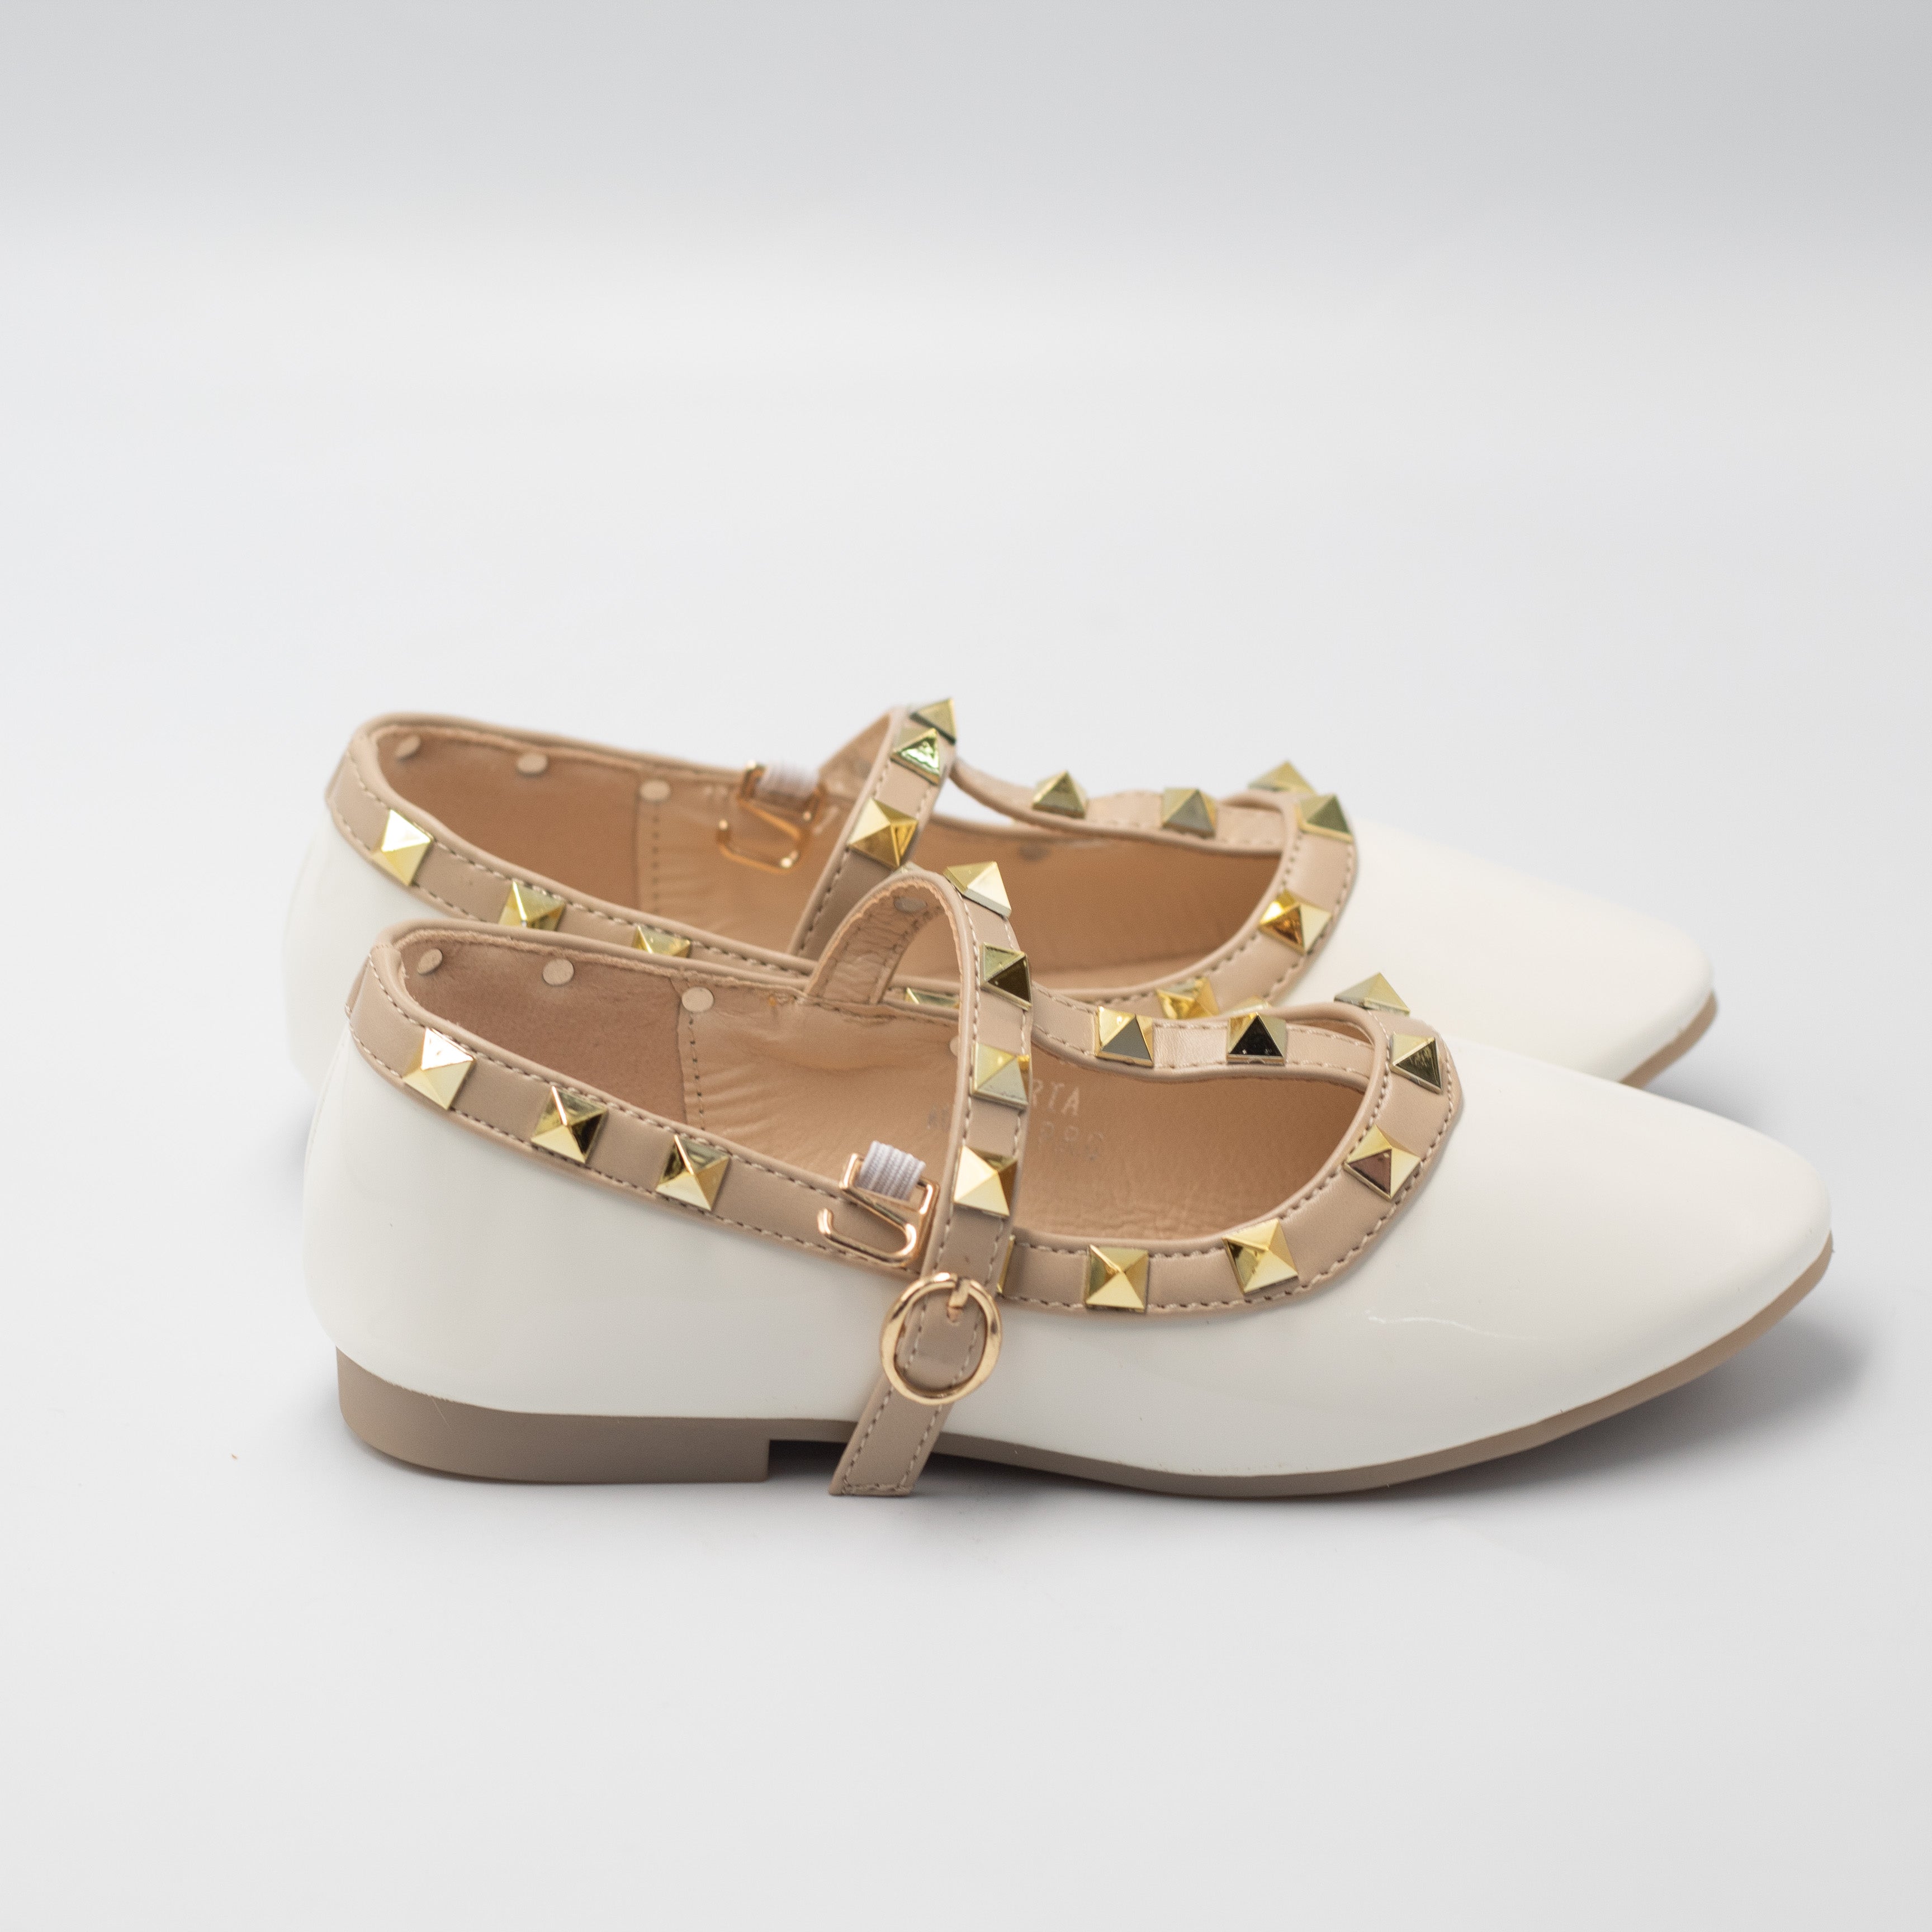 Caria inf girls dress pump with studded detail white